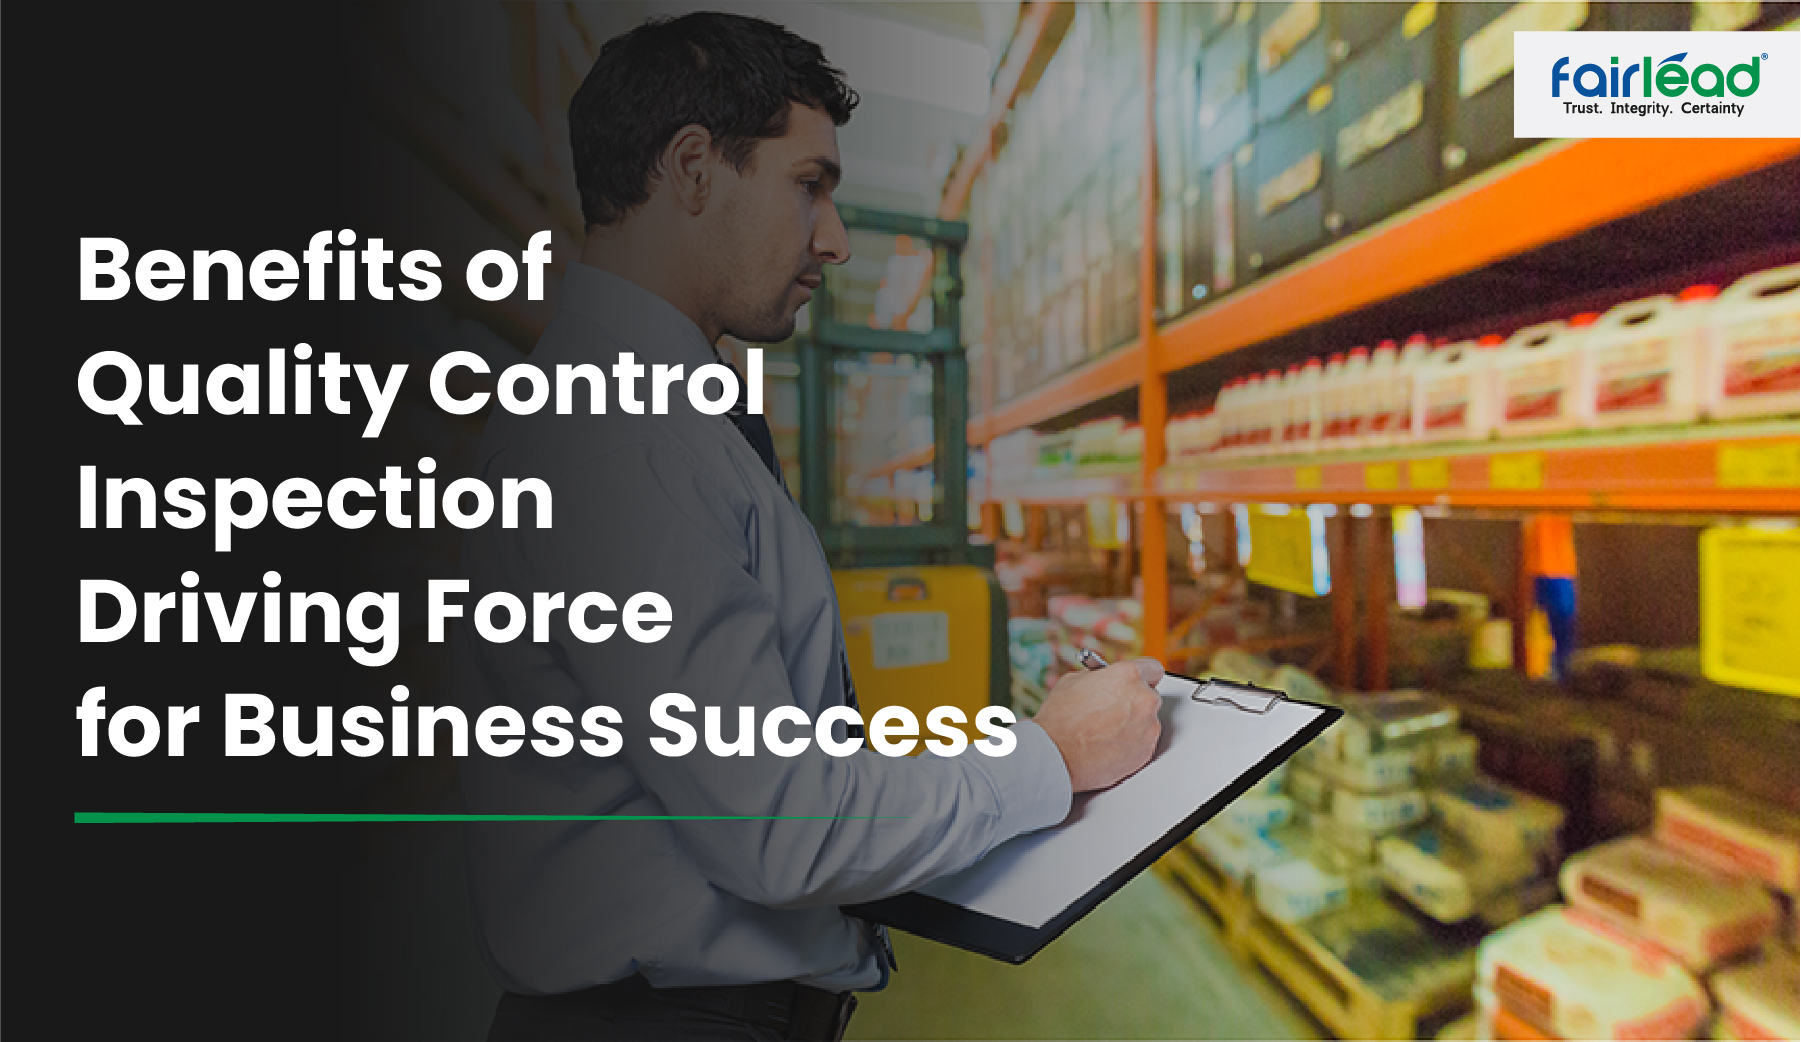 Benefits of Quality Control Inspection: Driving Force for Business Success